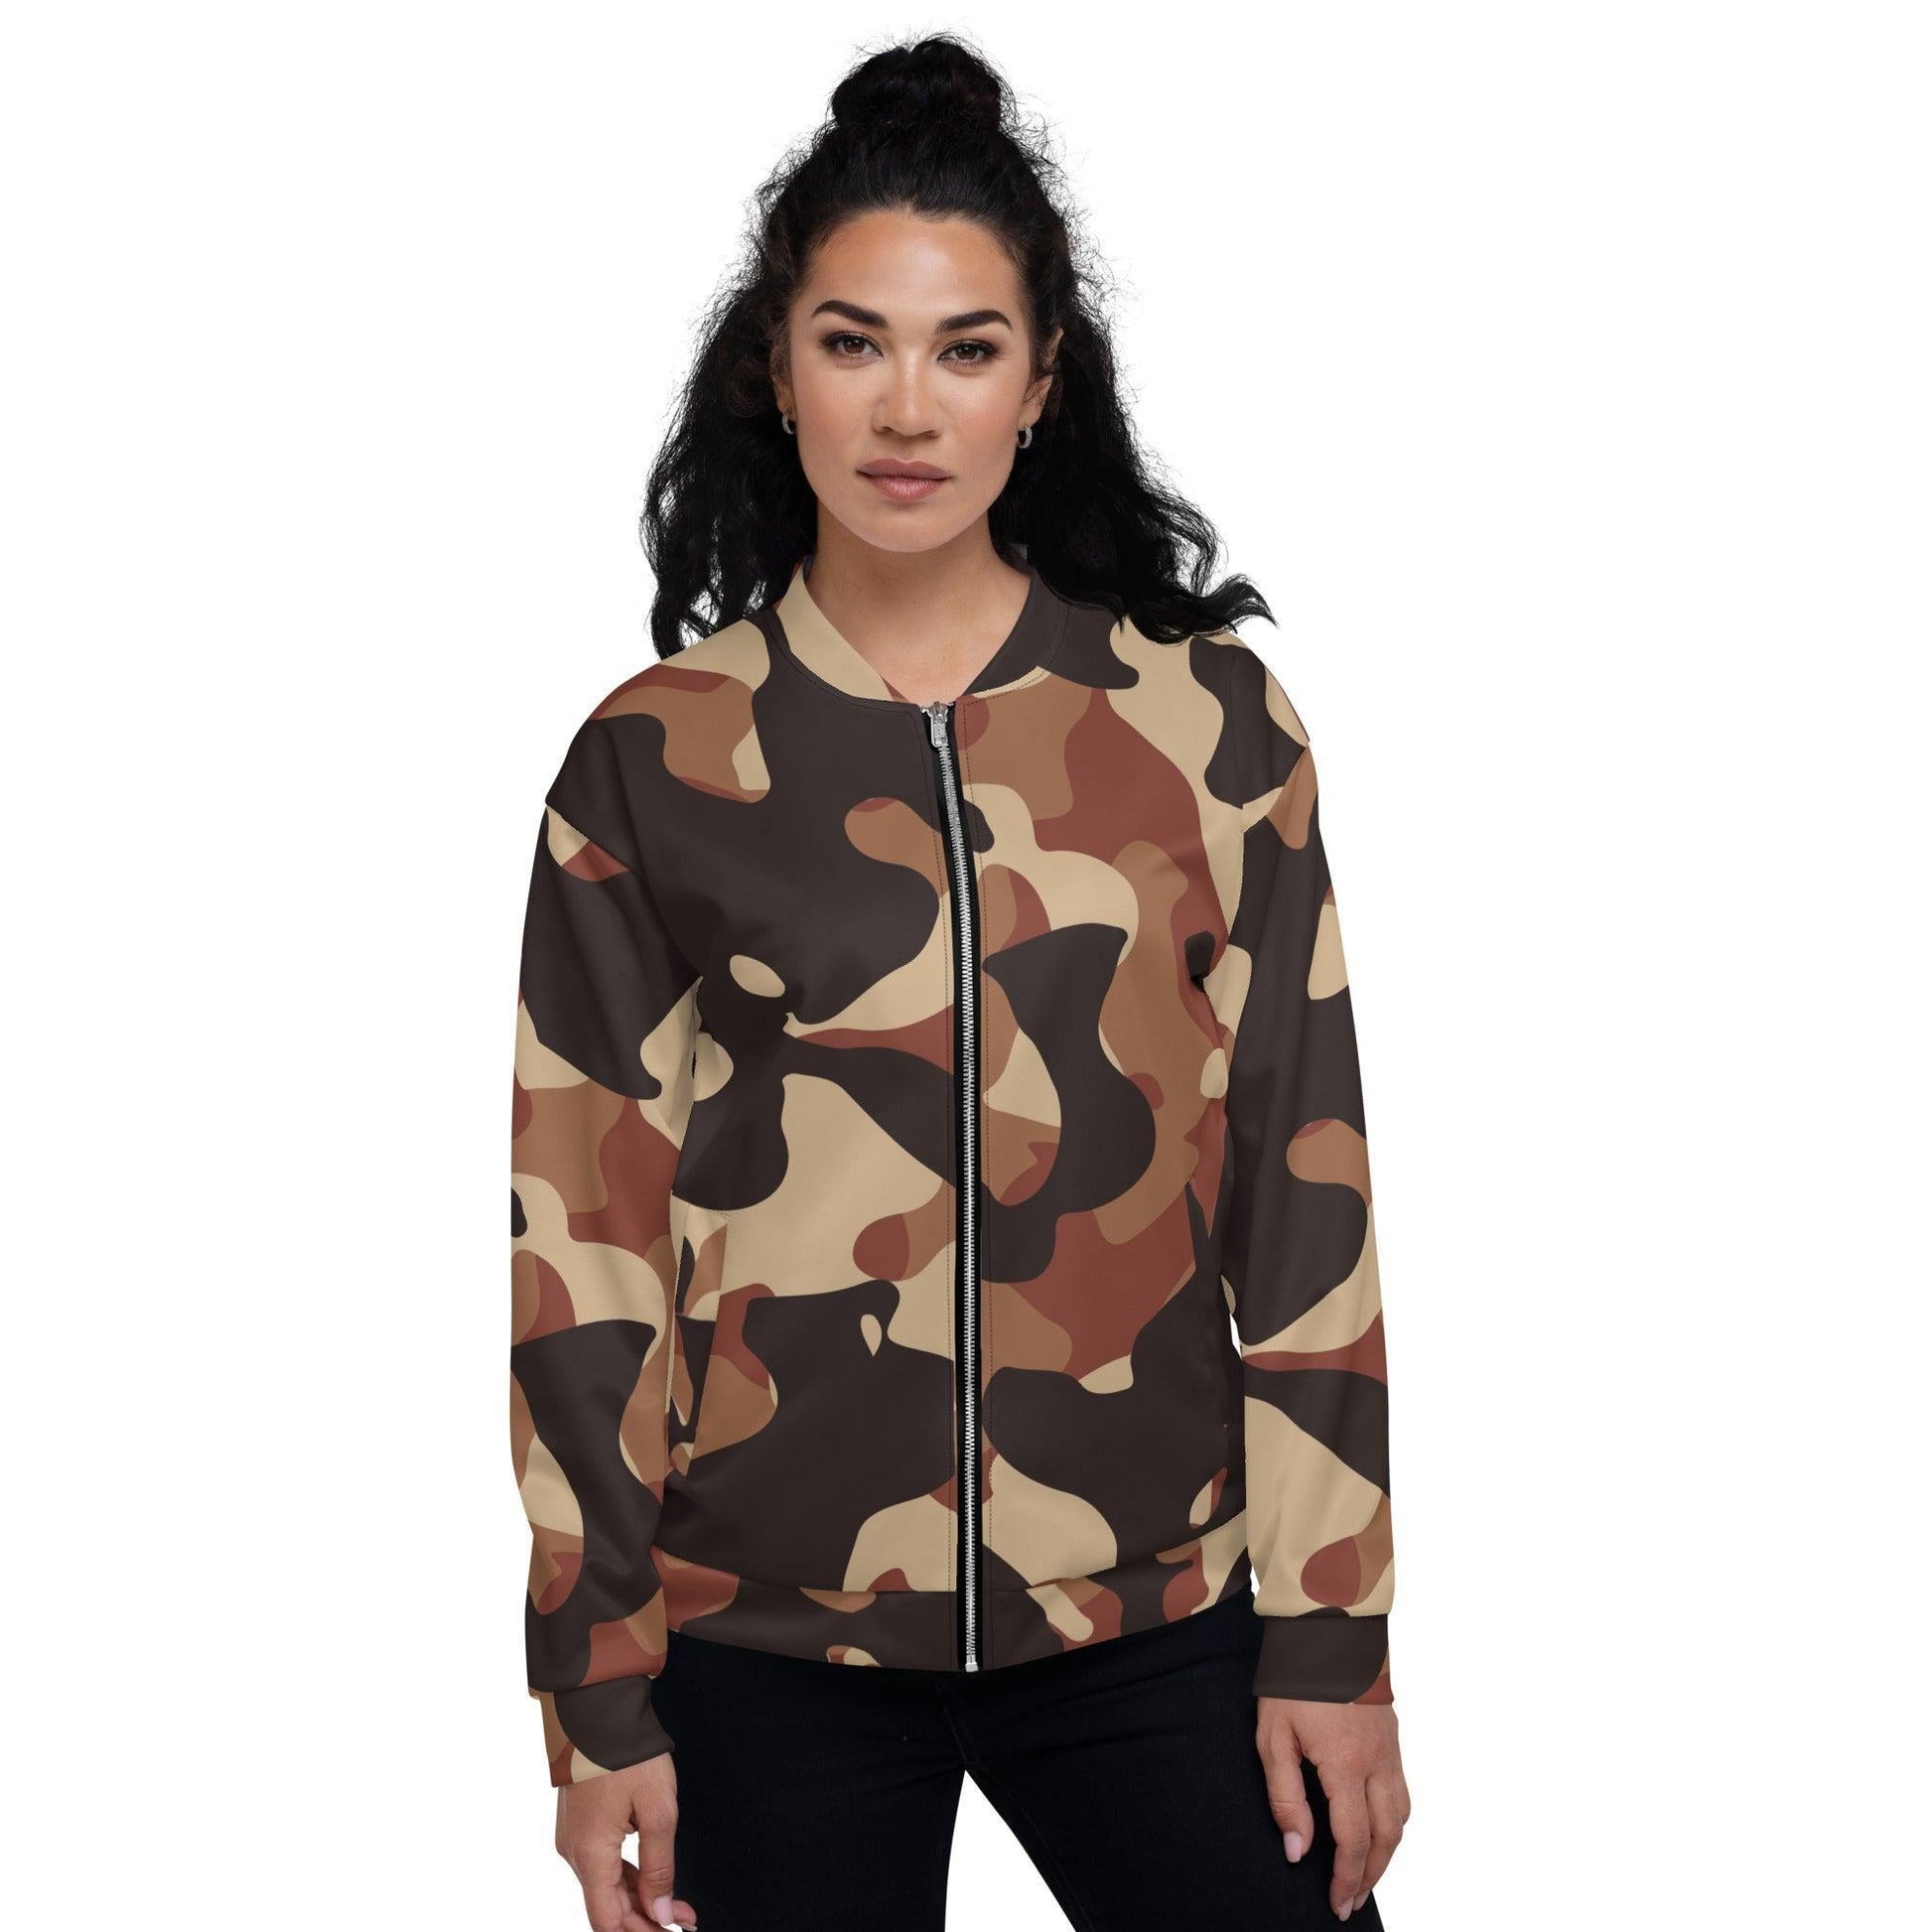 Brown Camouflage Bomberjacke -- Brown Camouflage Bomberjacke - undefined Bomberjacke | JLR Design